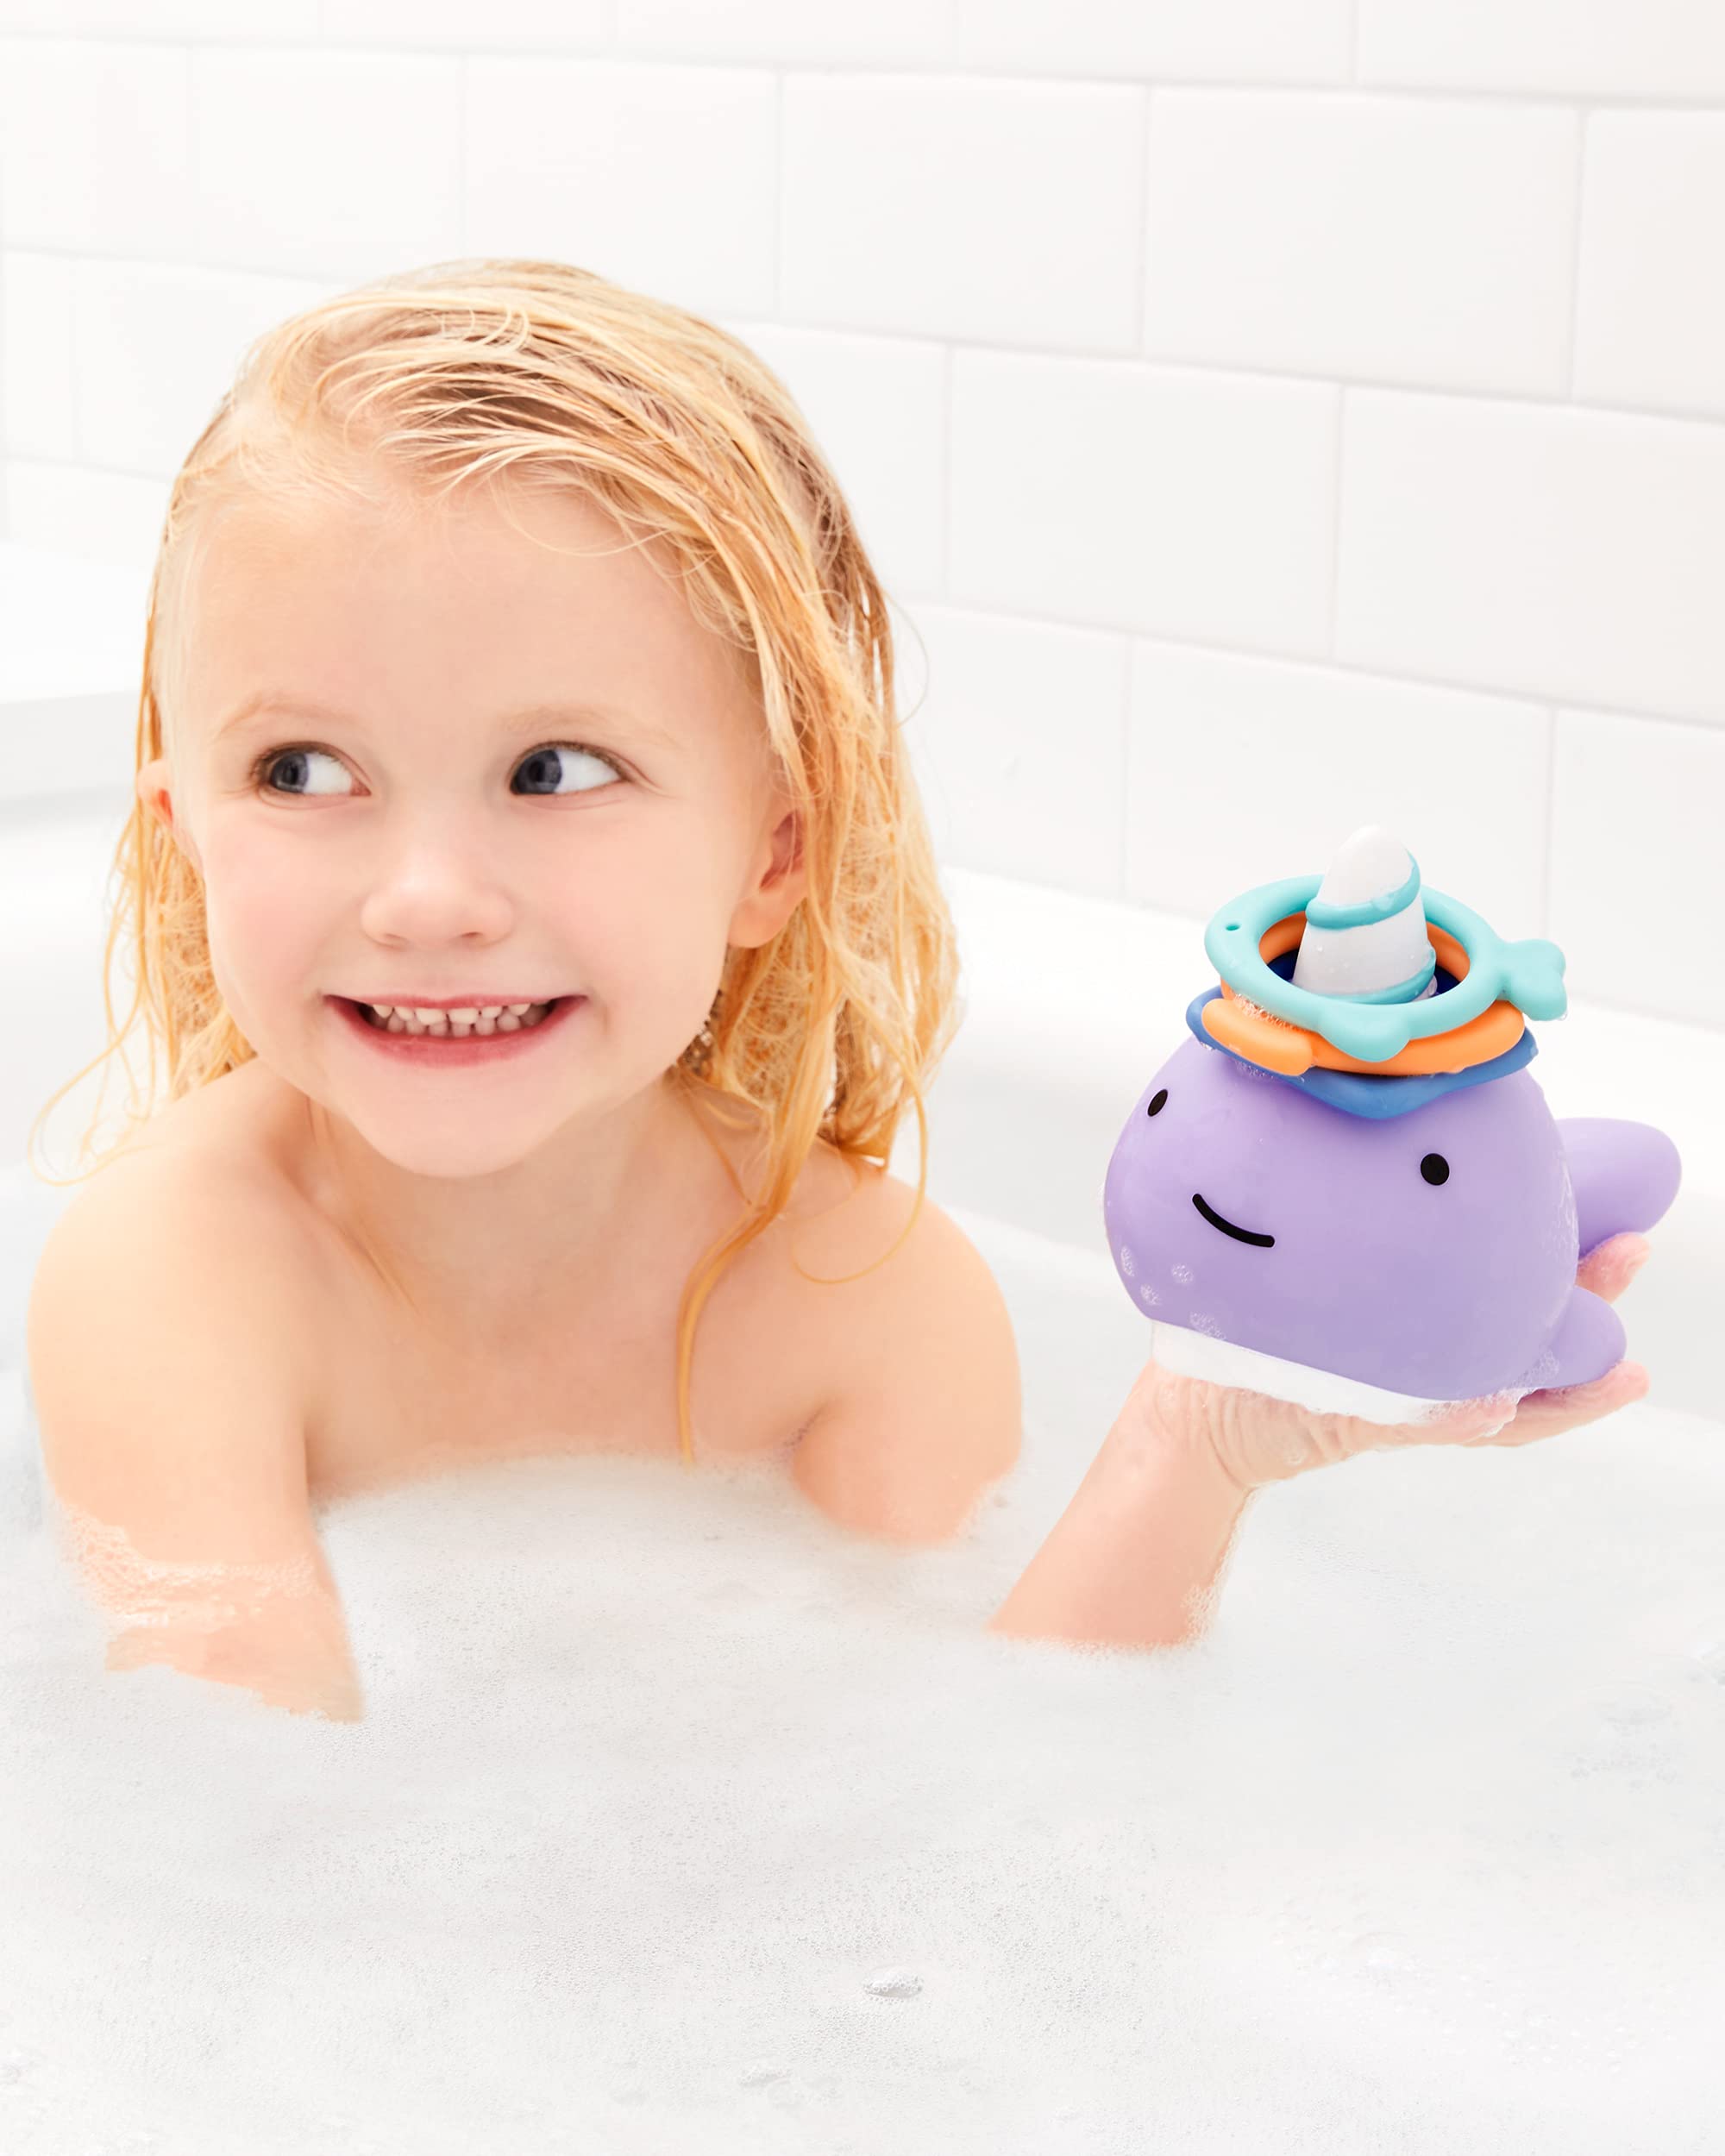 Skip Hop Baby Bath Toy, Zoo Narwhal Ring Toss